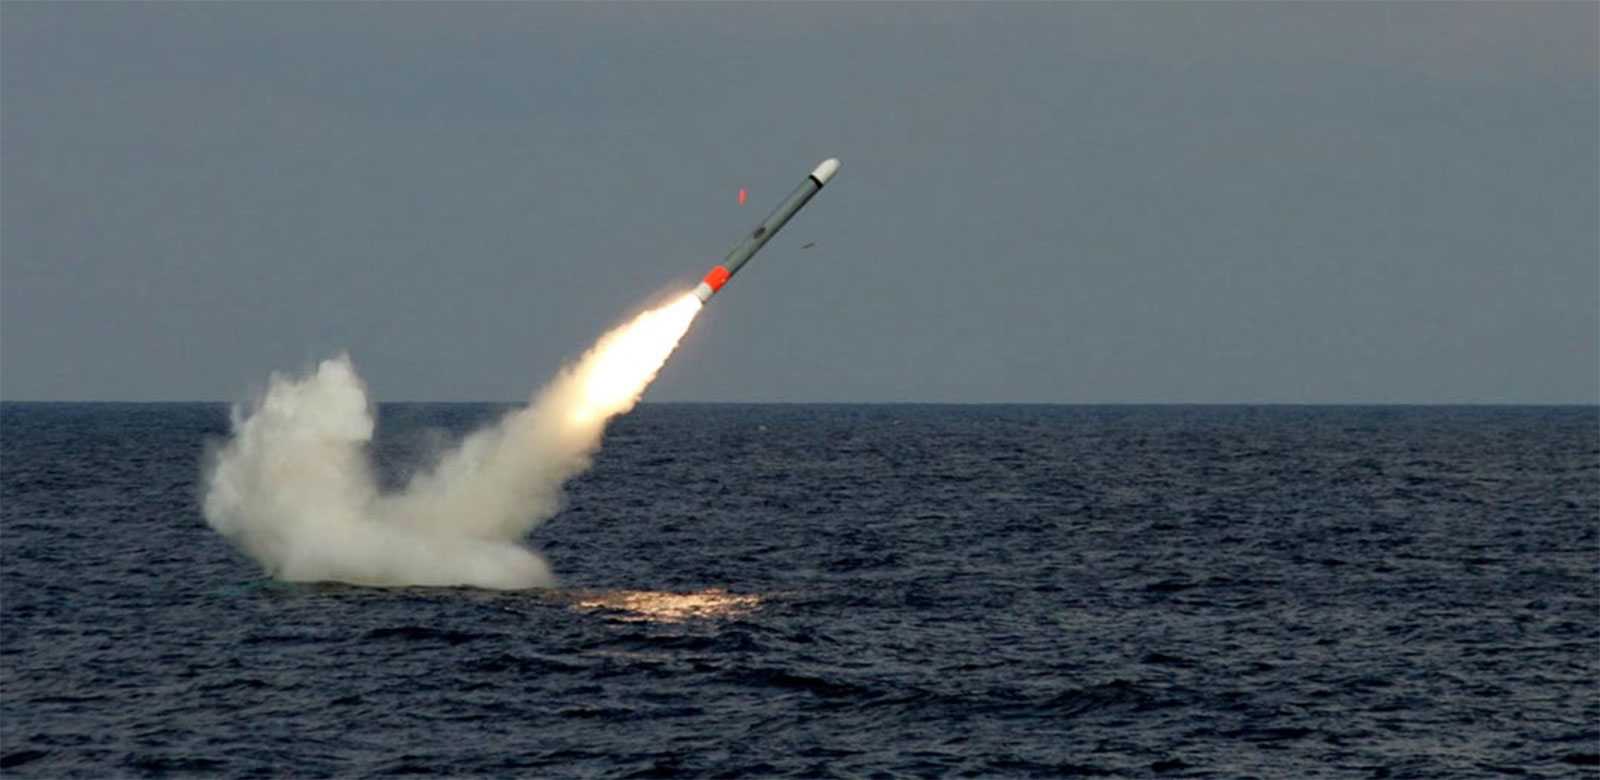 220 tomahawk cruise missiles